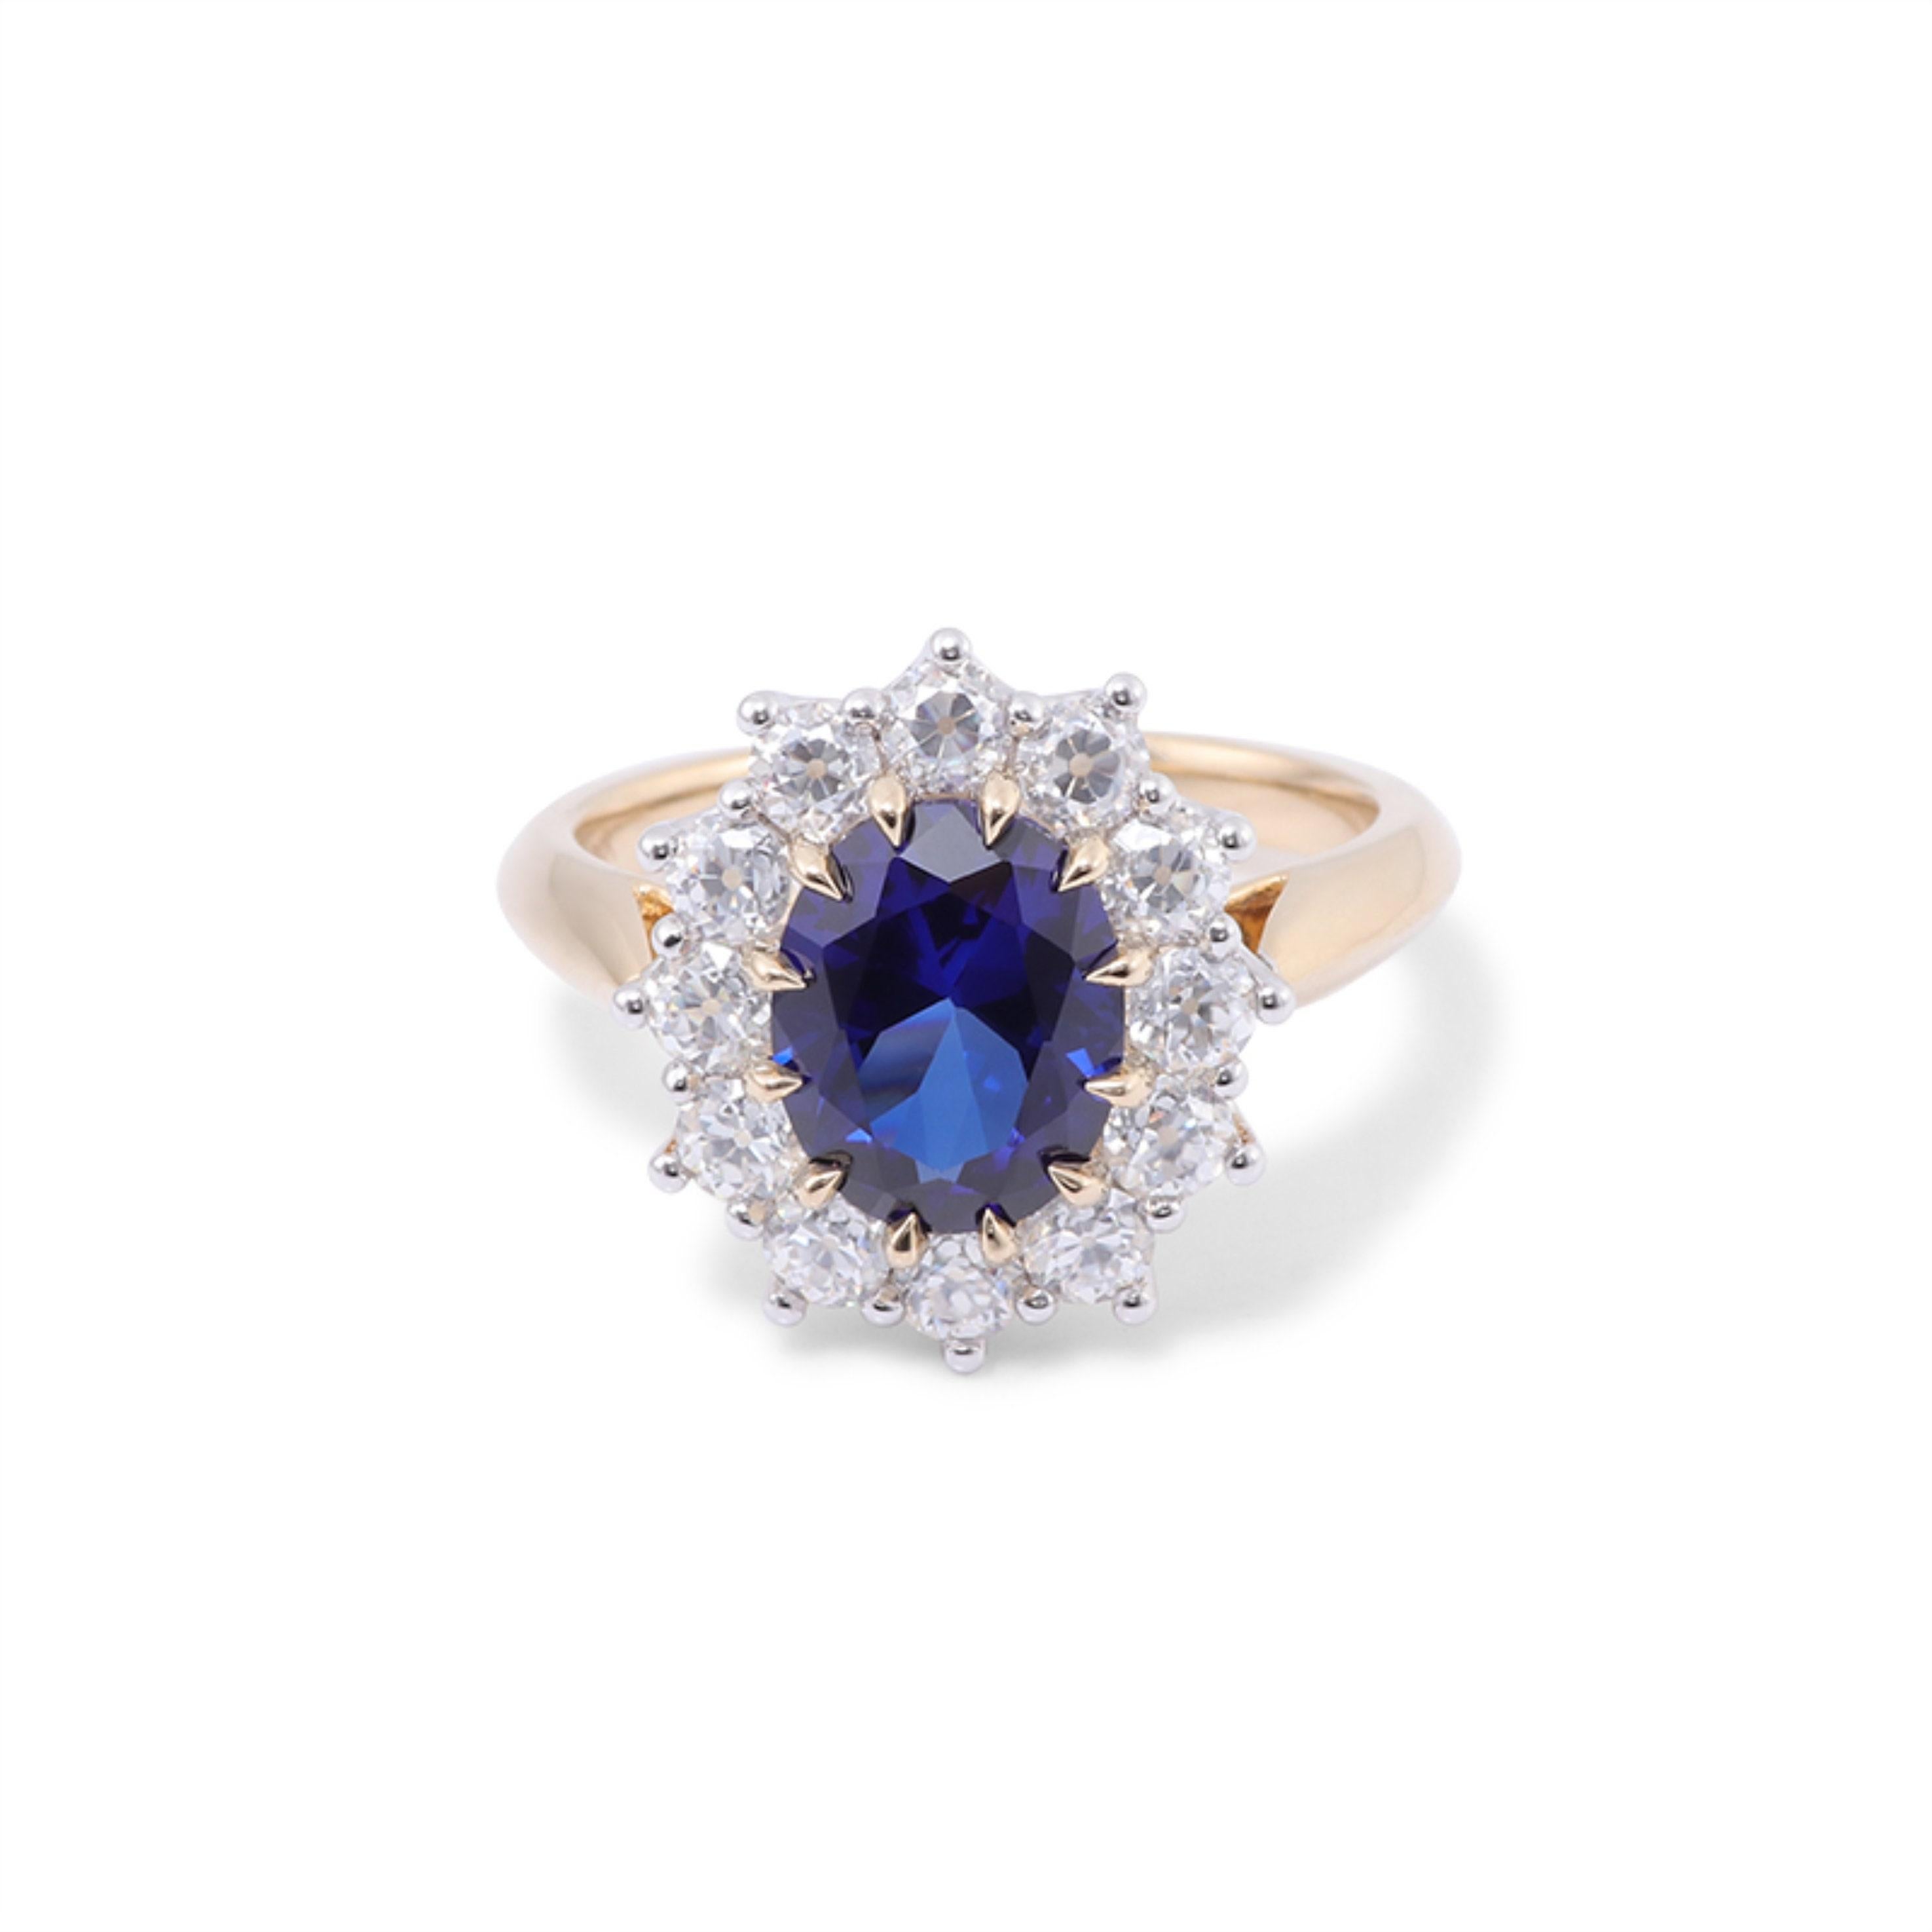 For Sale:  2 Carat Natural Sapphire Diamond Engagement Ring Set in 18K Gold, Cocktail Ring 4